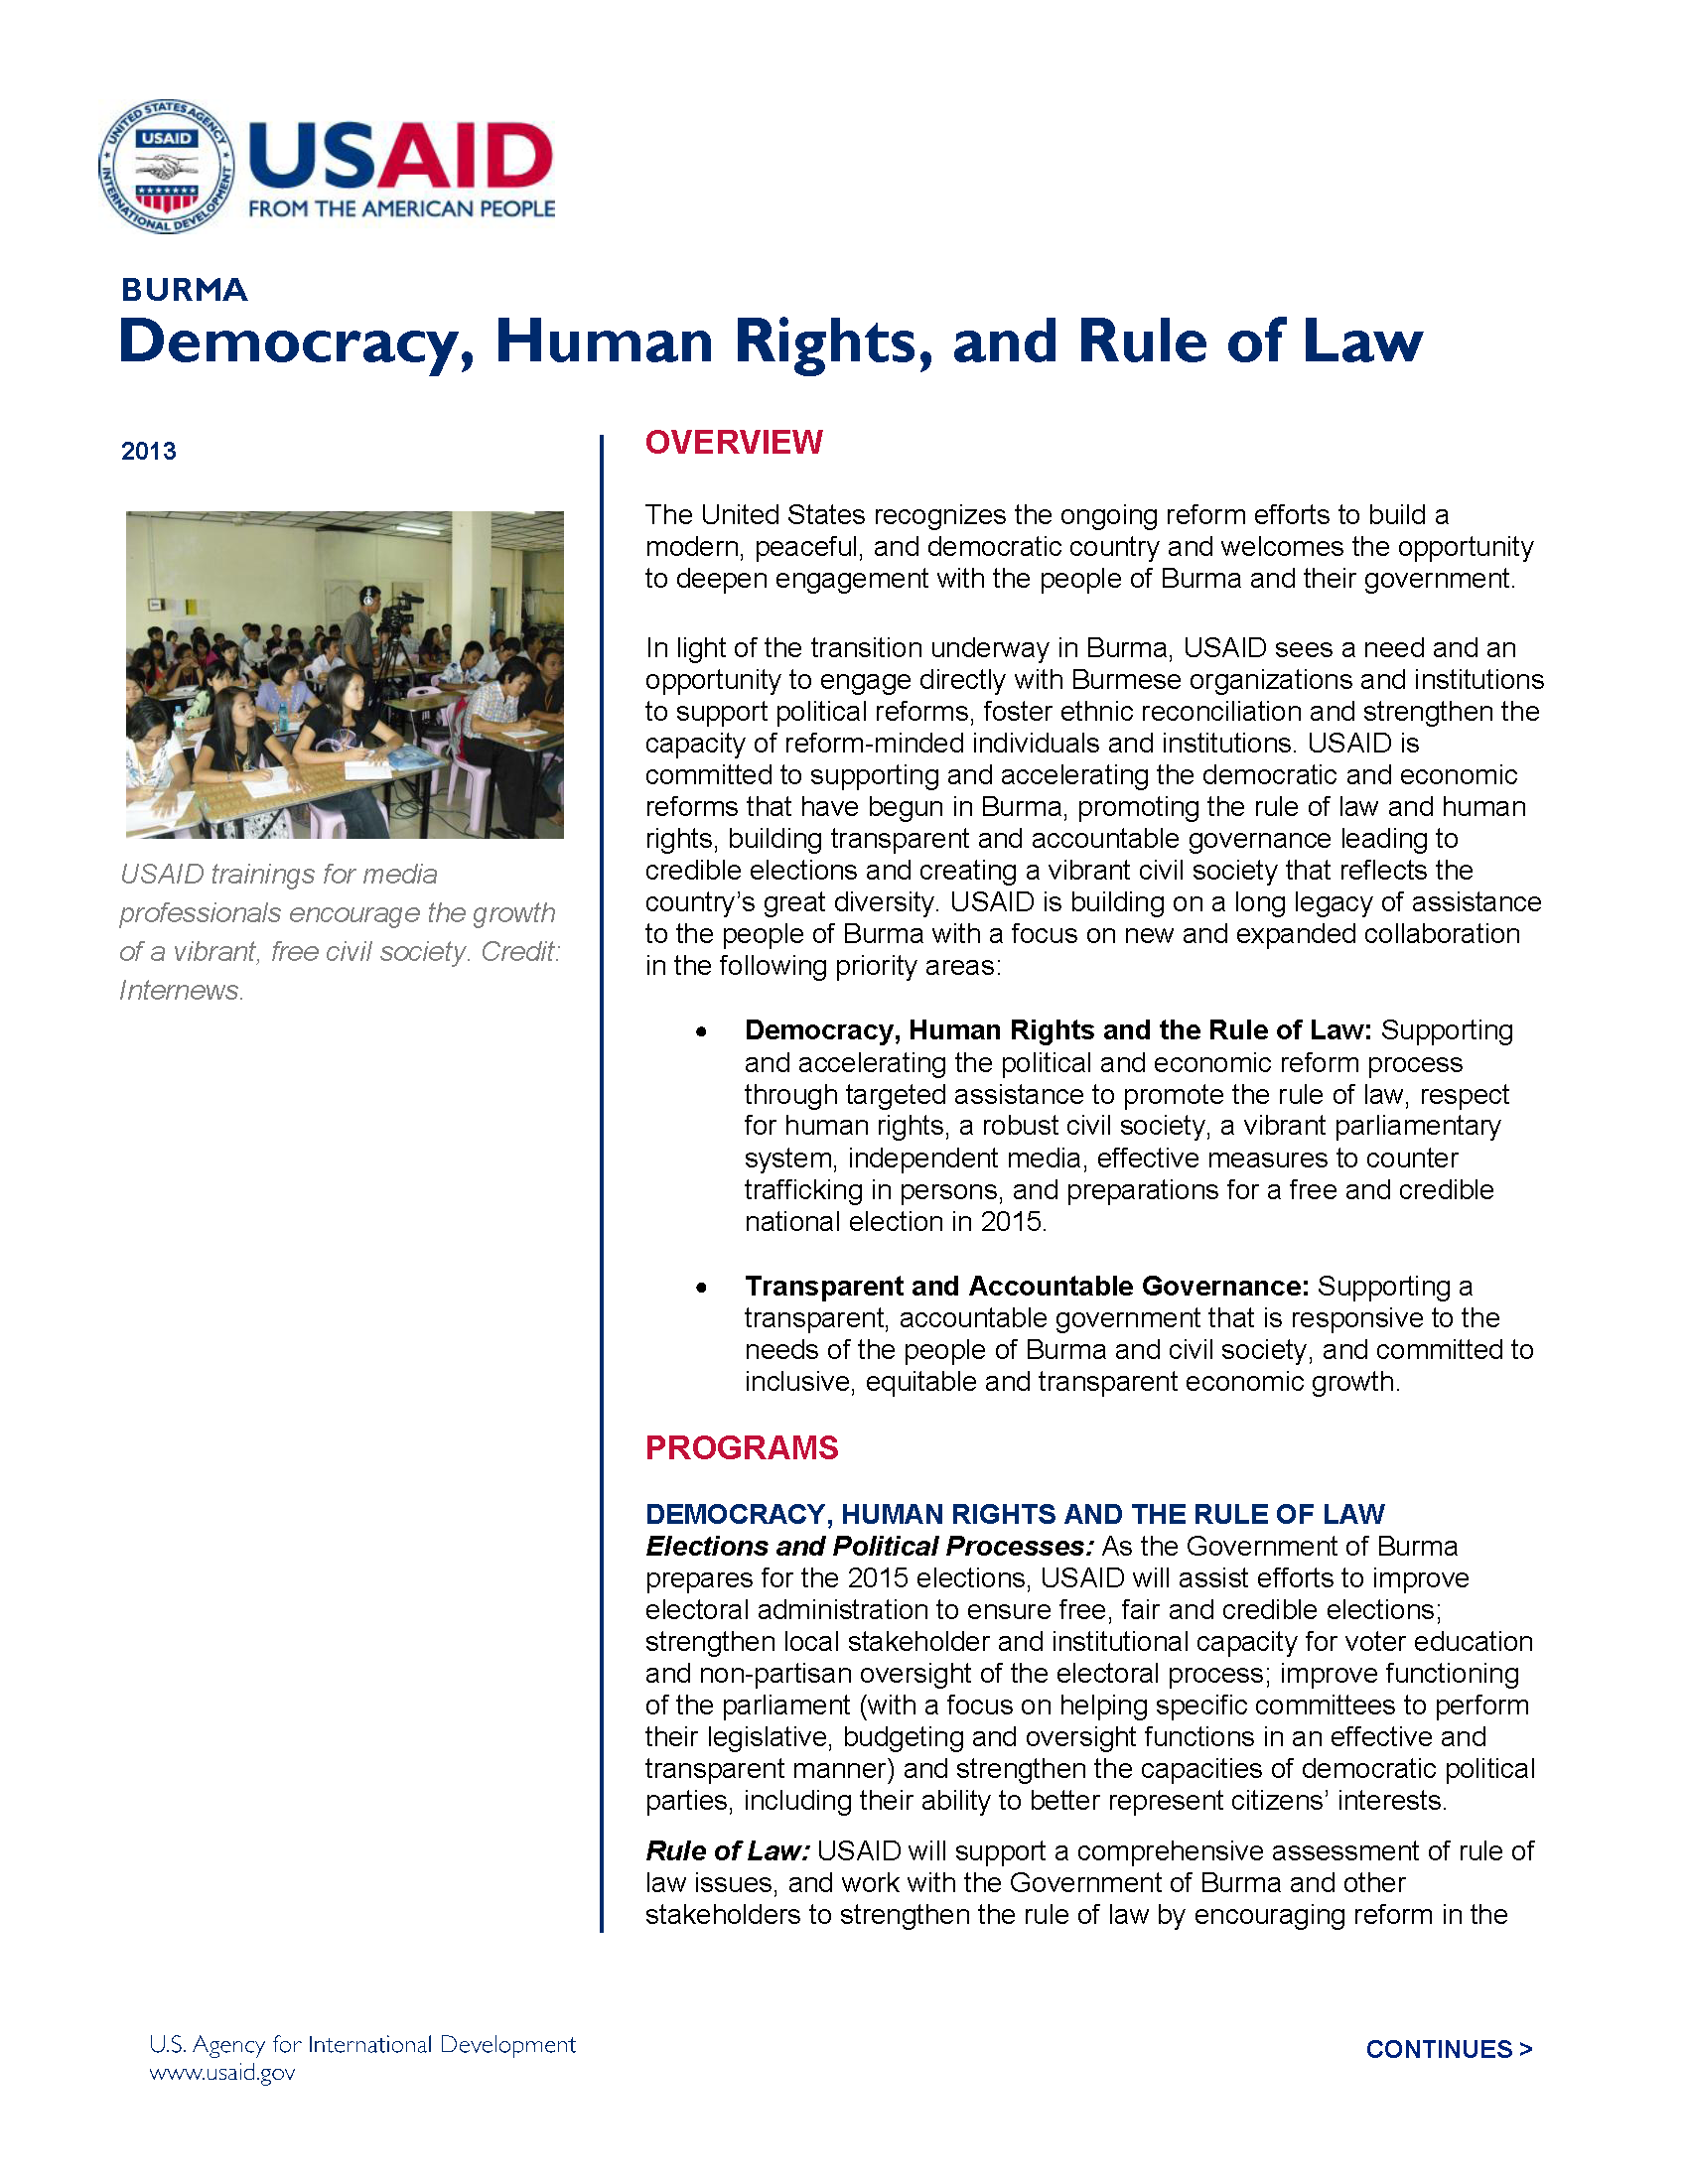 Burma: Democracy, Human Rights, and Rule of Law Fact Sheet